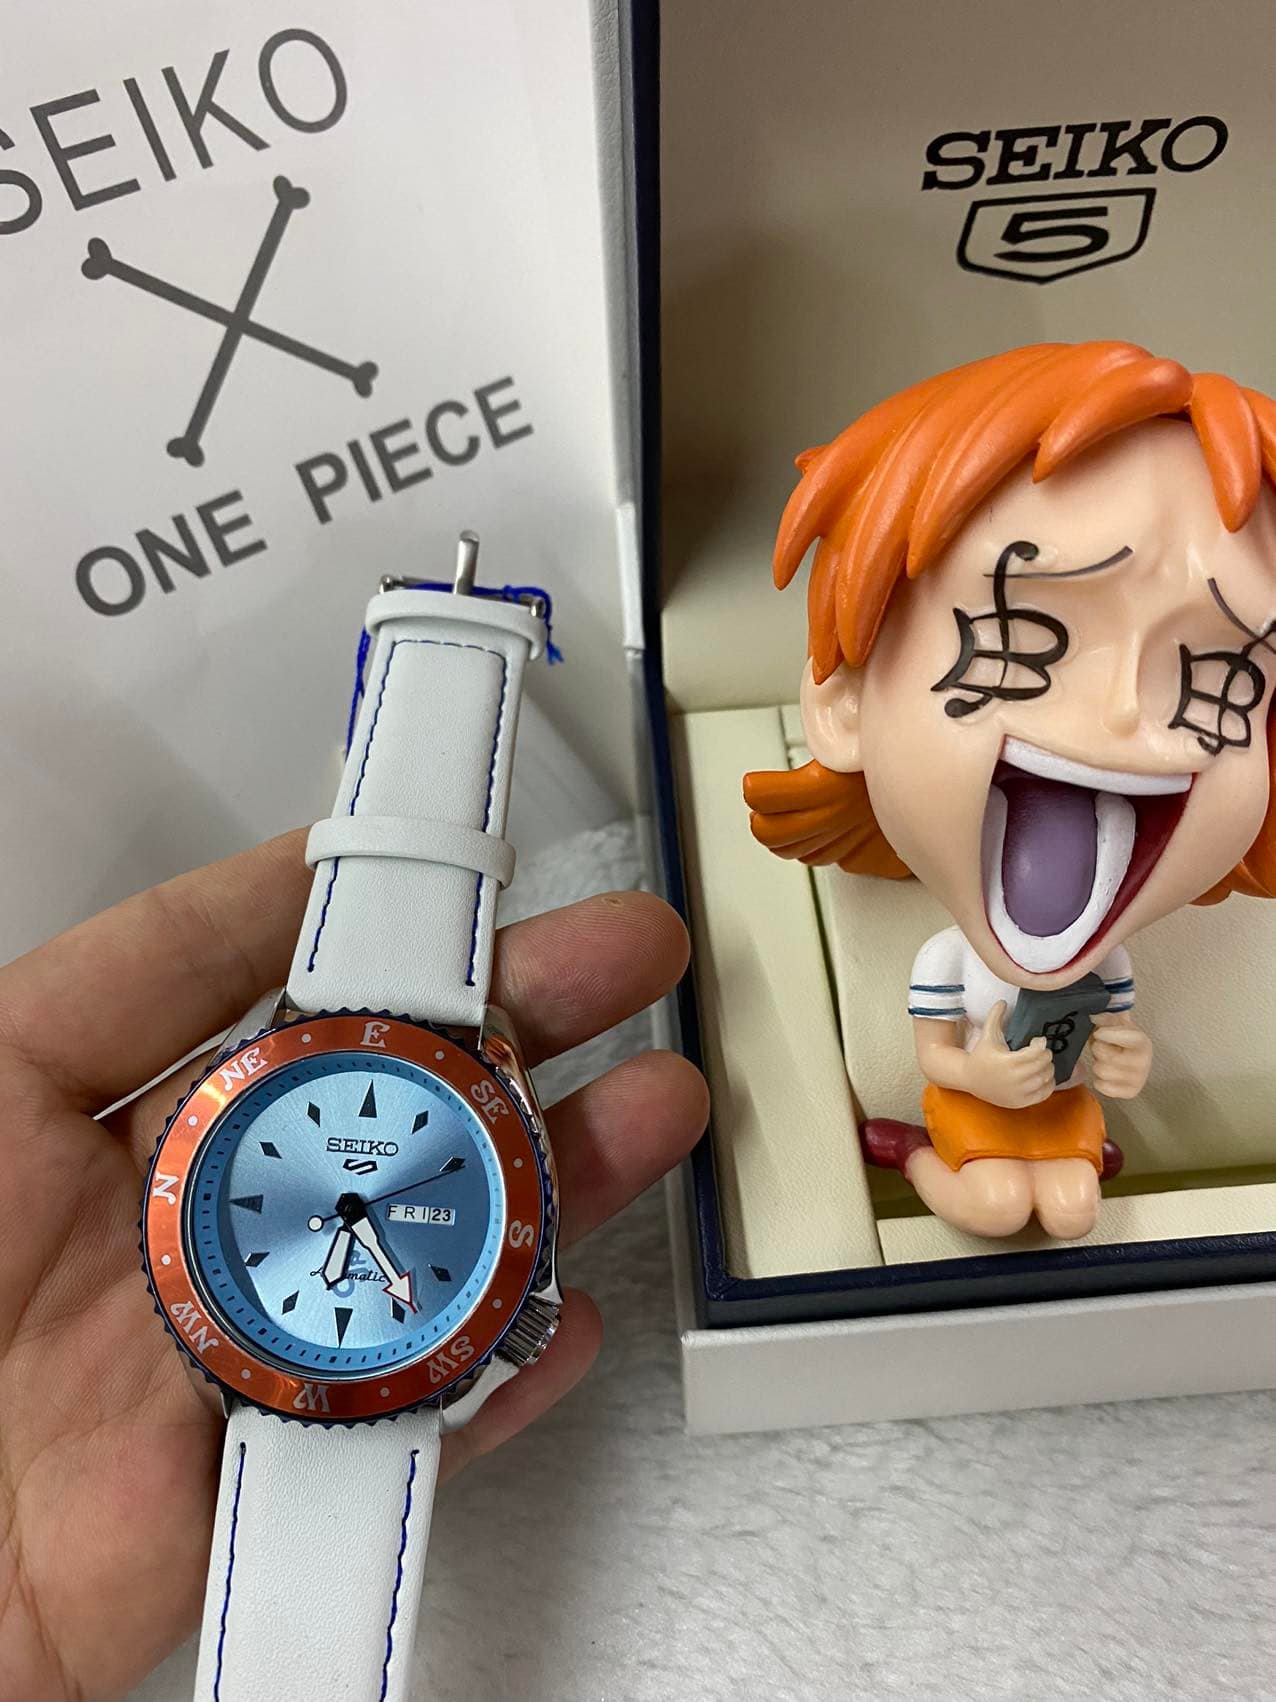 Limited Edition Seiko 5 Watch One Piece Nami Special Edition | Lazada PH